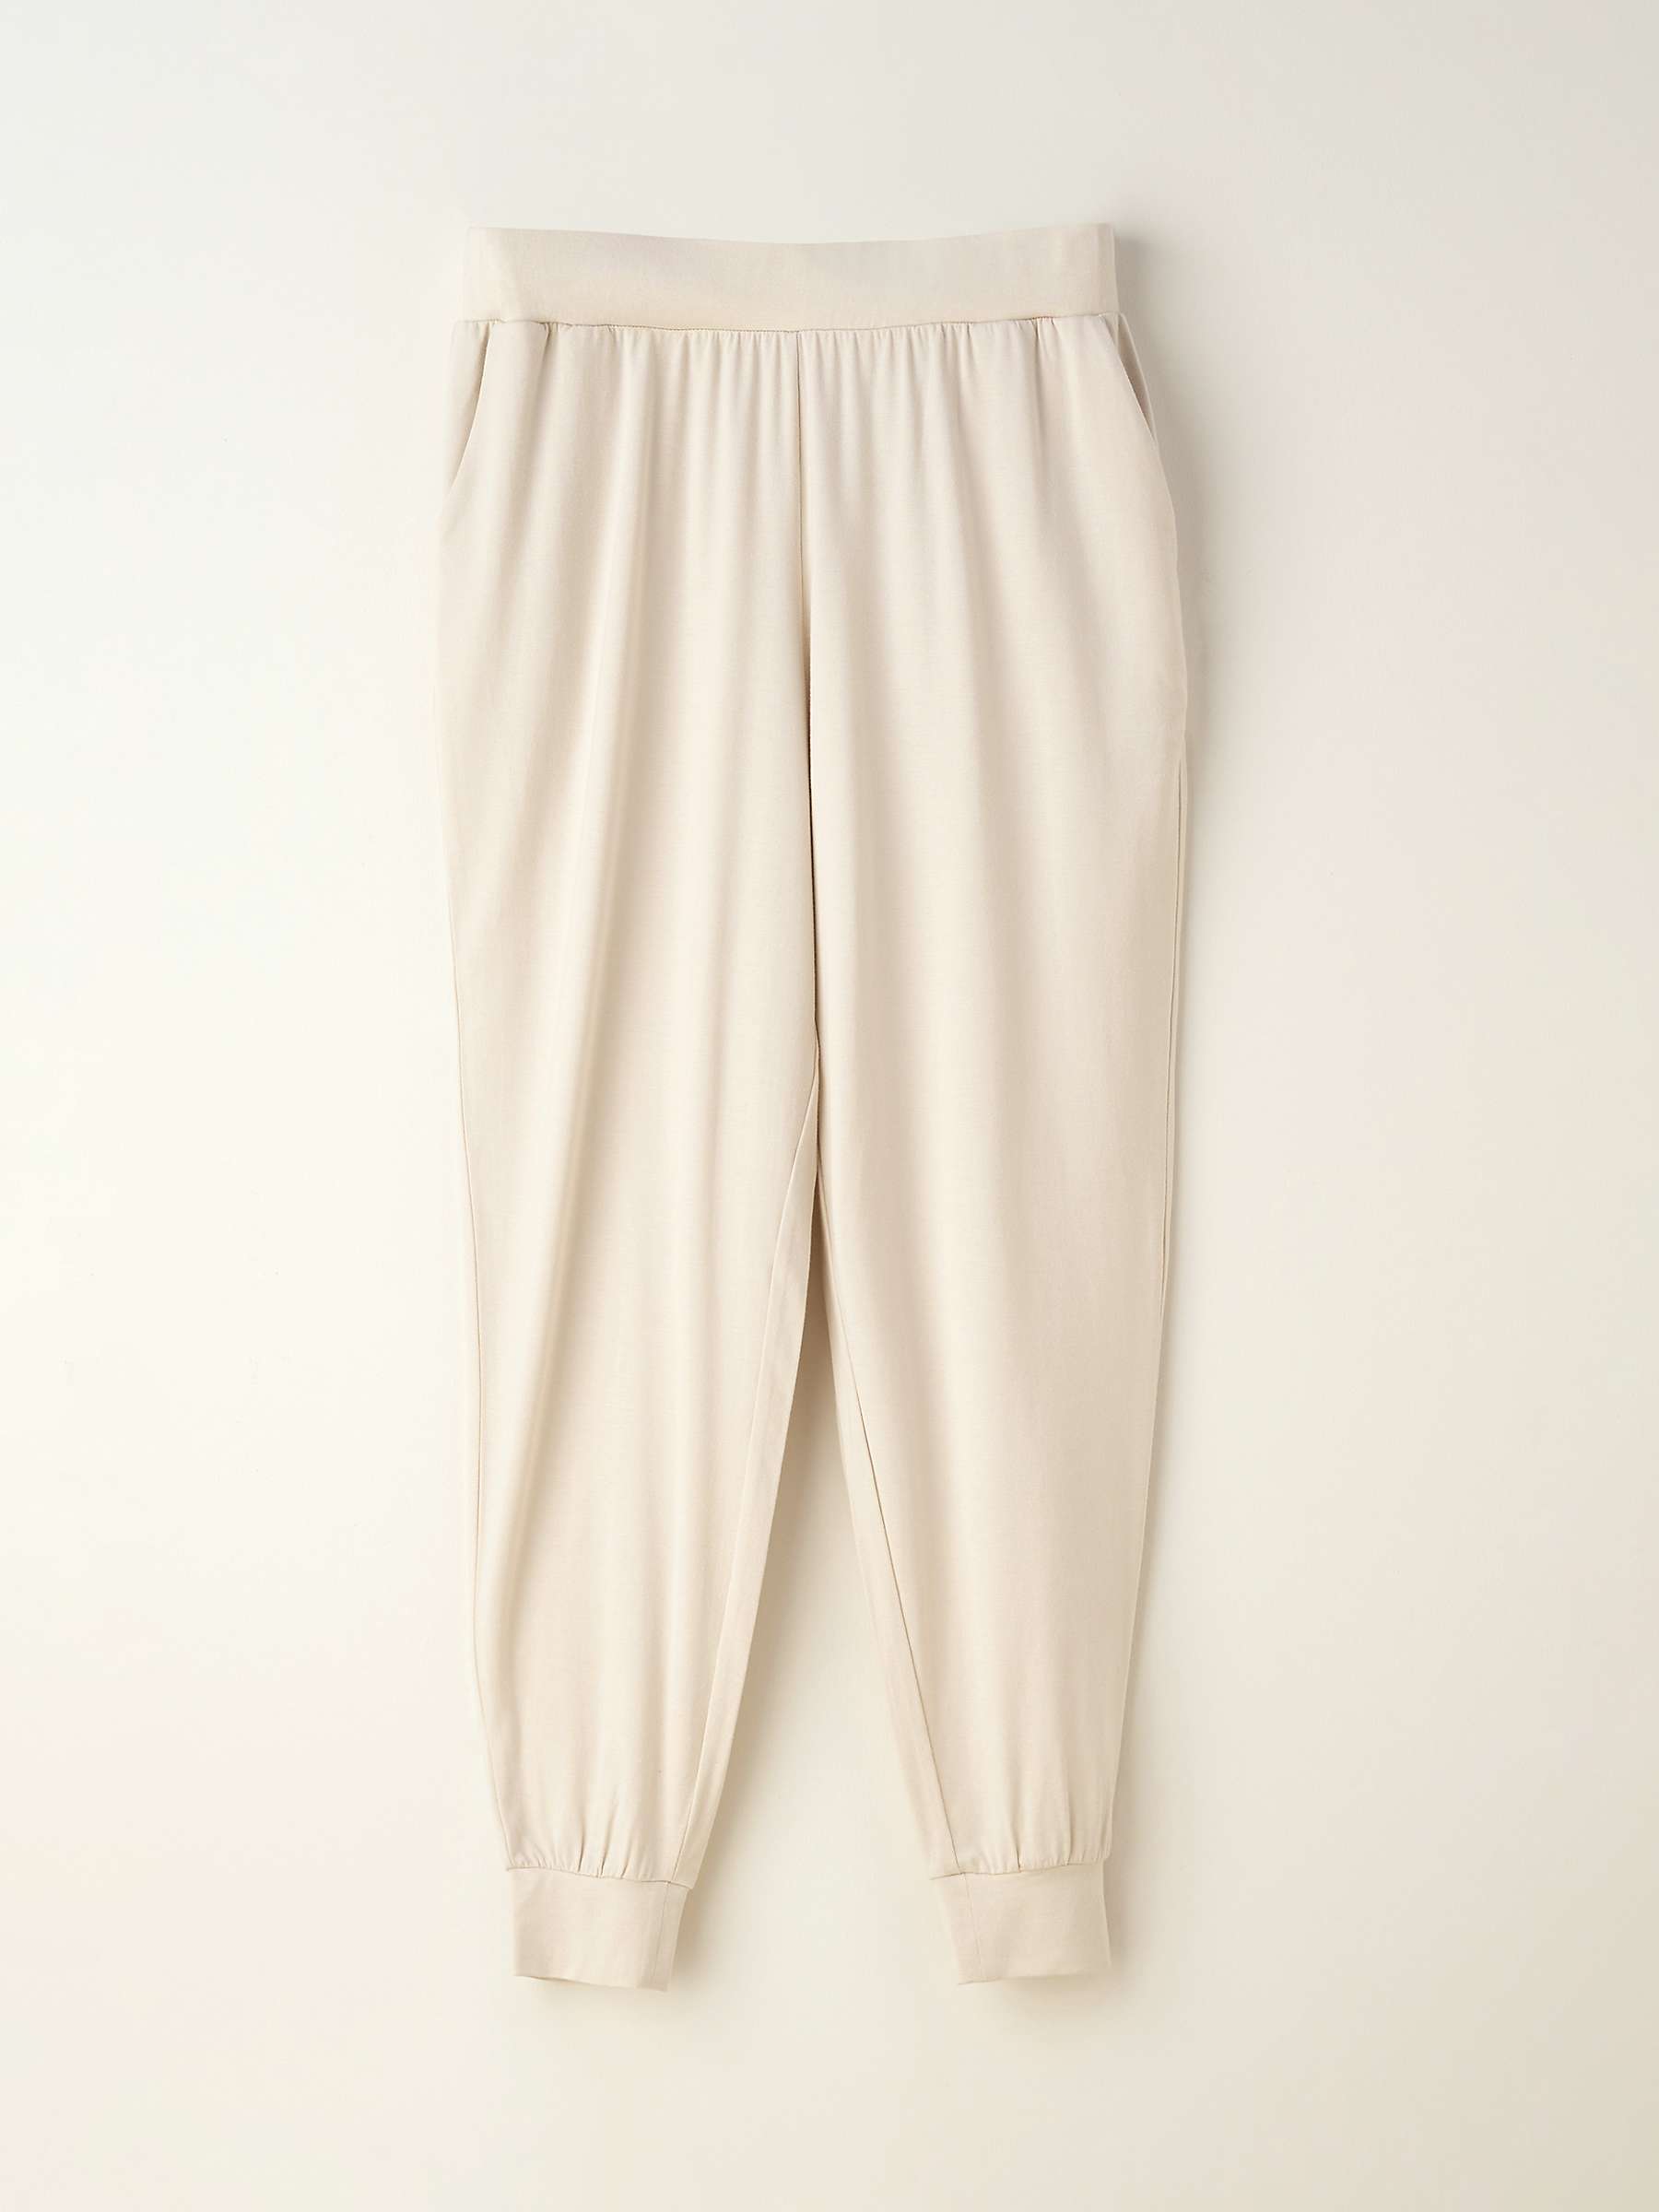 Buy Truly Hareem Joggers Online at johnlewis.com